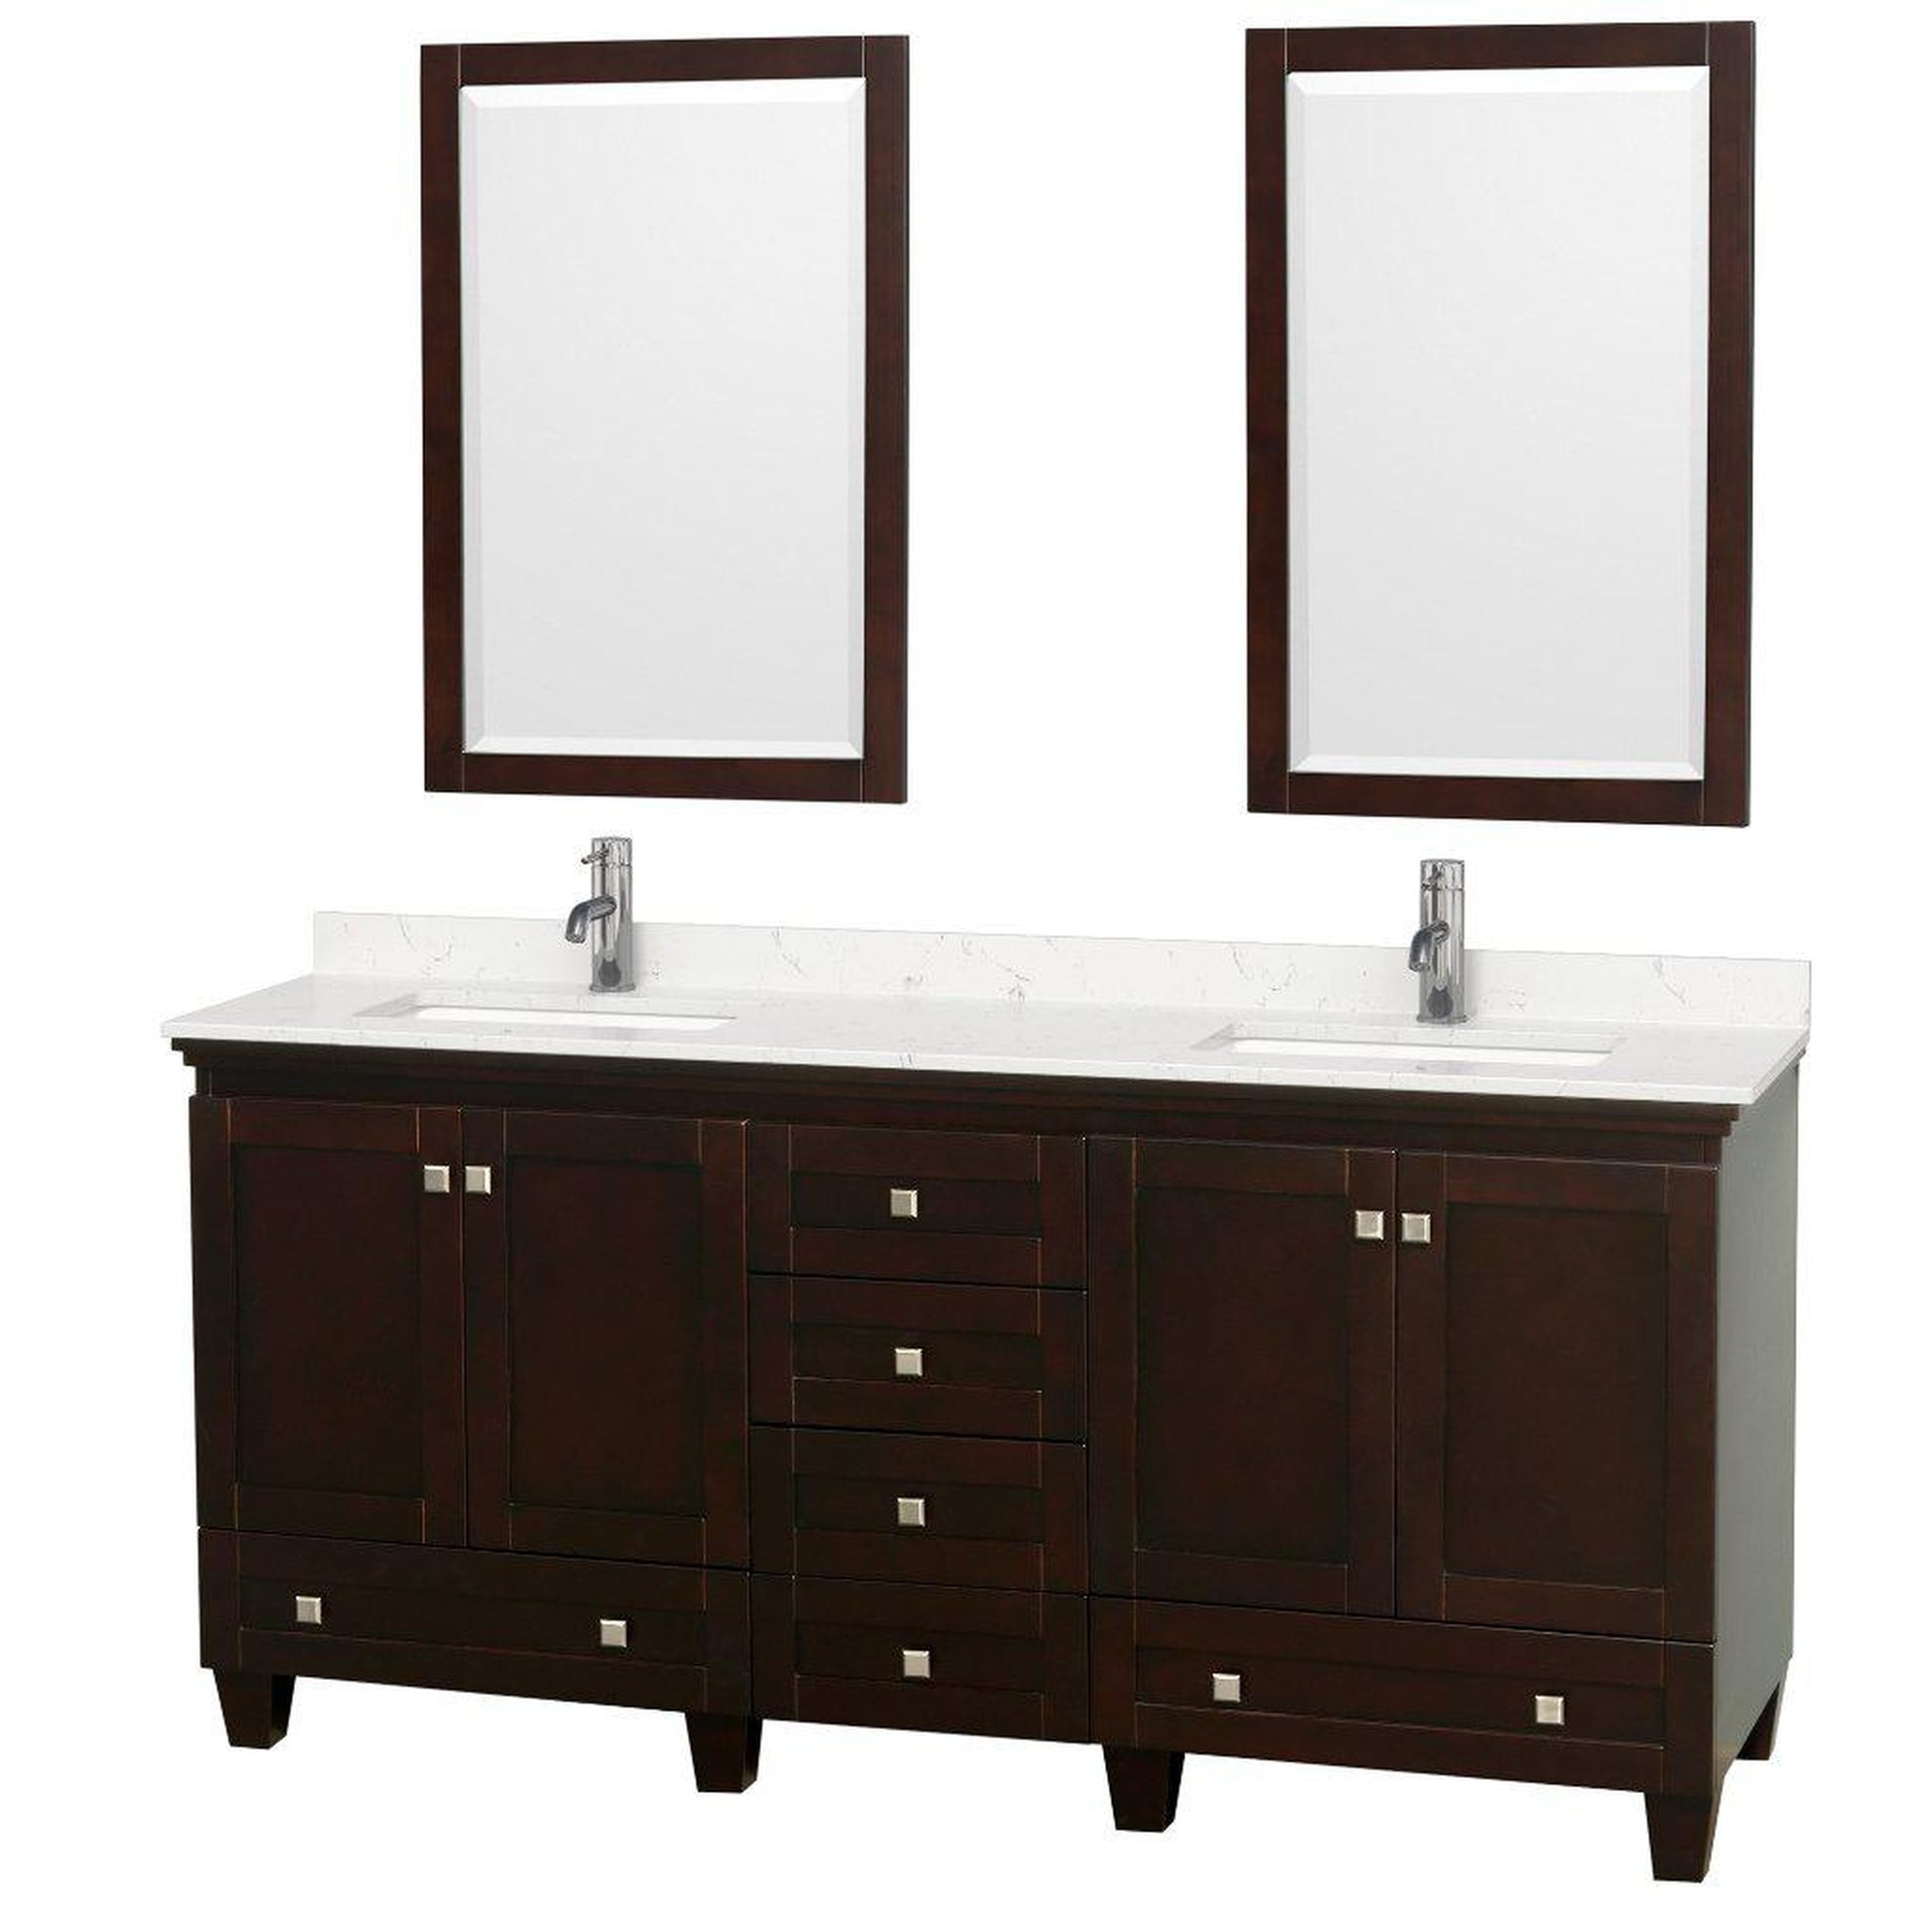 Wyndham Collection Acclaim 72" Double Bathroom Espresso Vanity With Light-Vein Carrara Cultured Marble Countertop And Undermount Square Sinks And 2 Set Of 24" Mirror